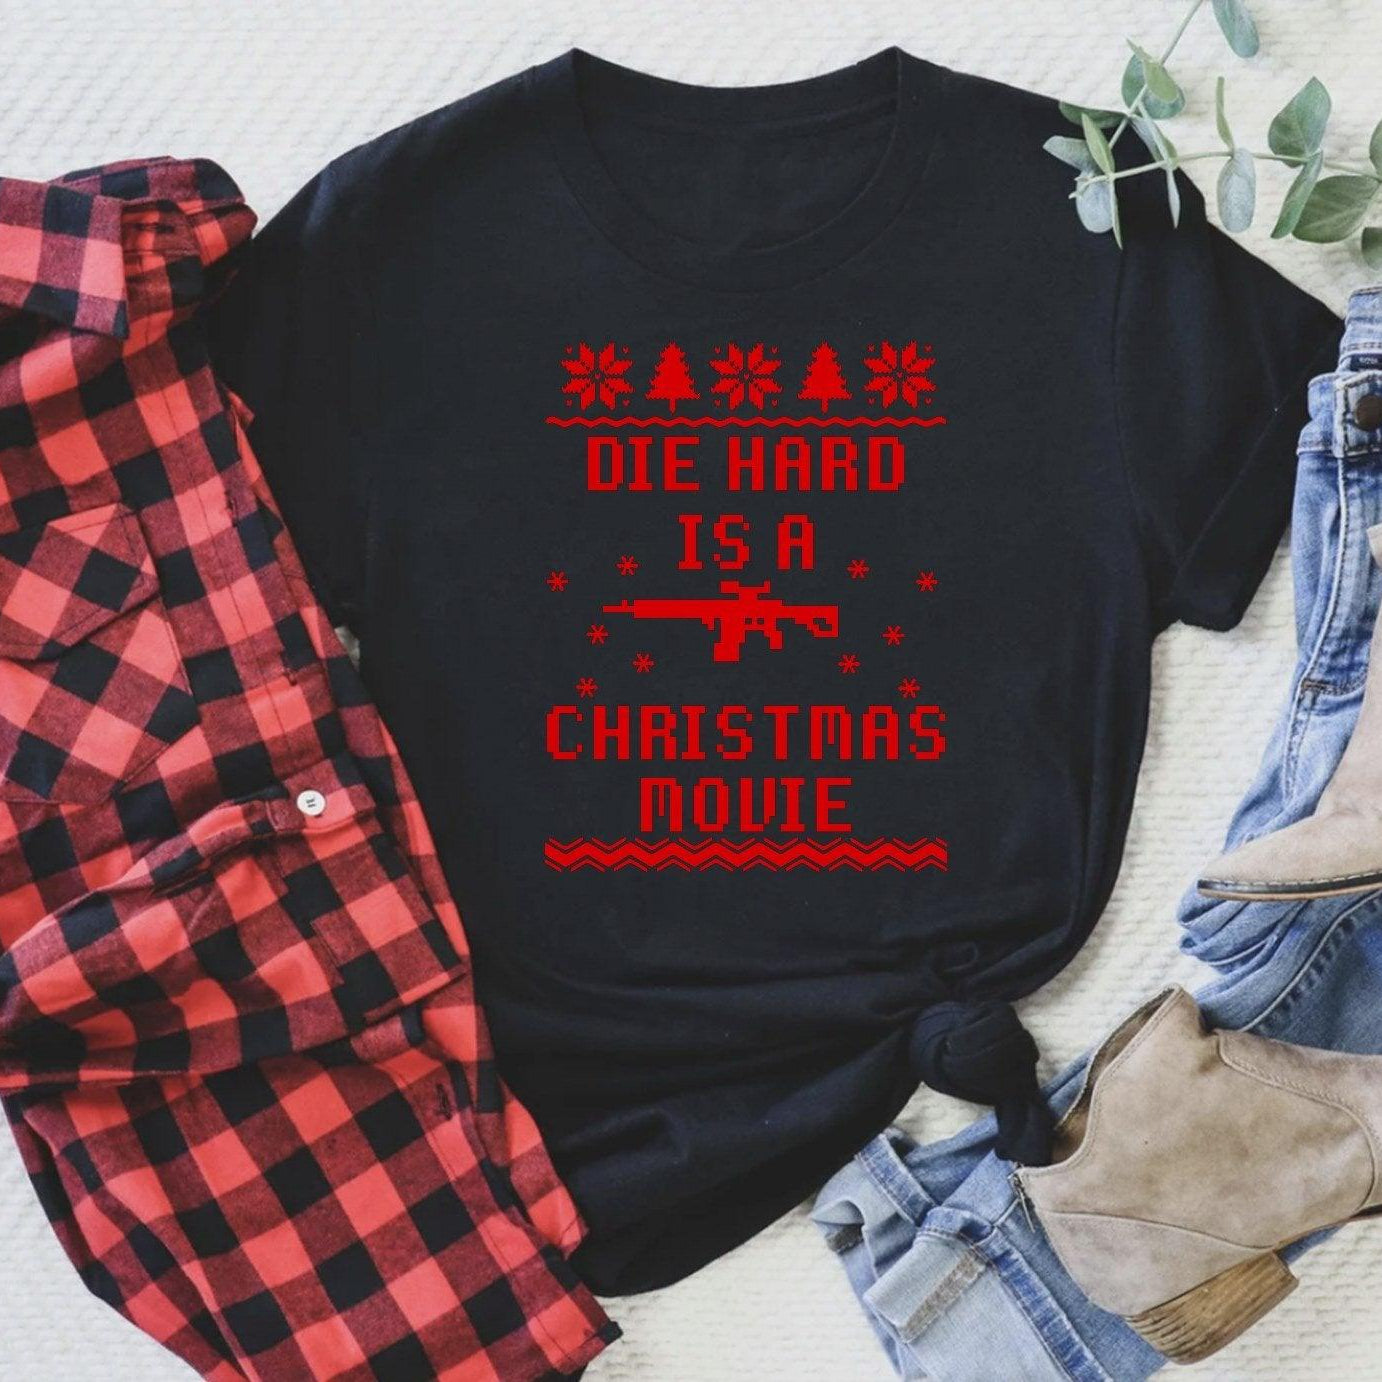 DIE HARD IS A CHRISTMAS MOVIE 🔫 - Signastyle Boutique